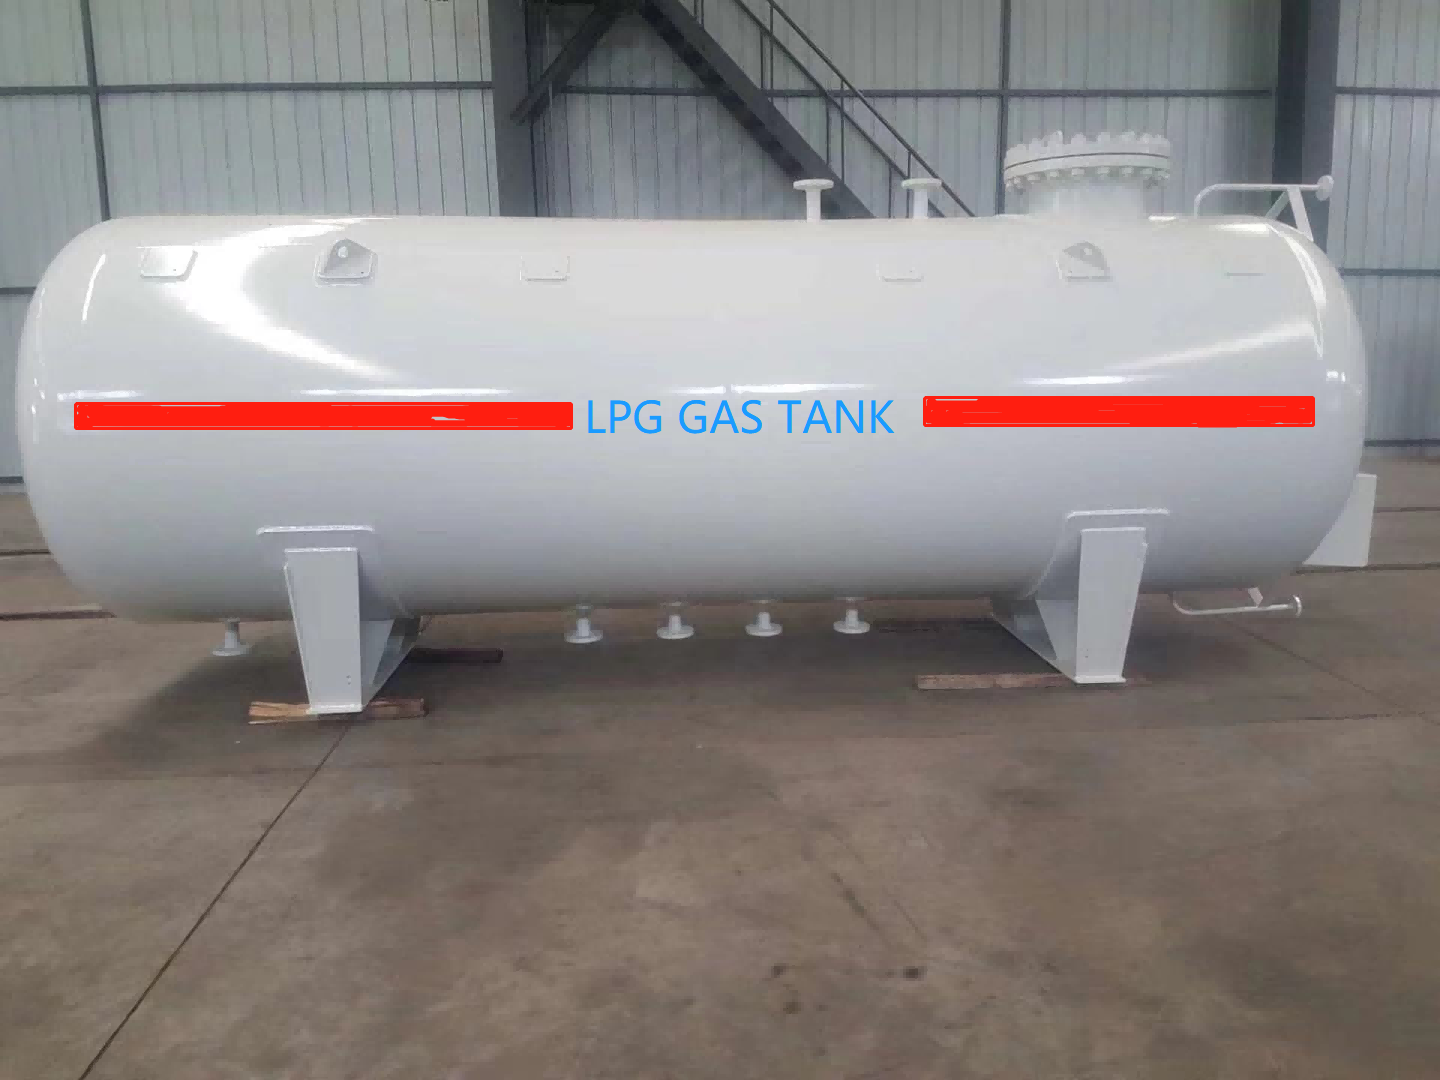 LPG storage tank safety equipment and facilities